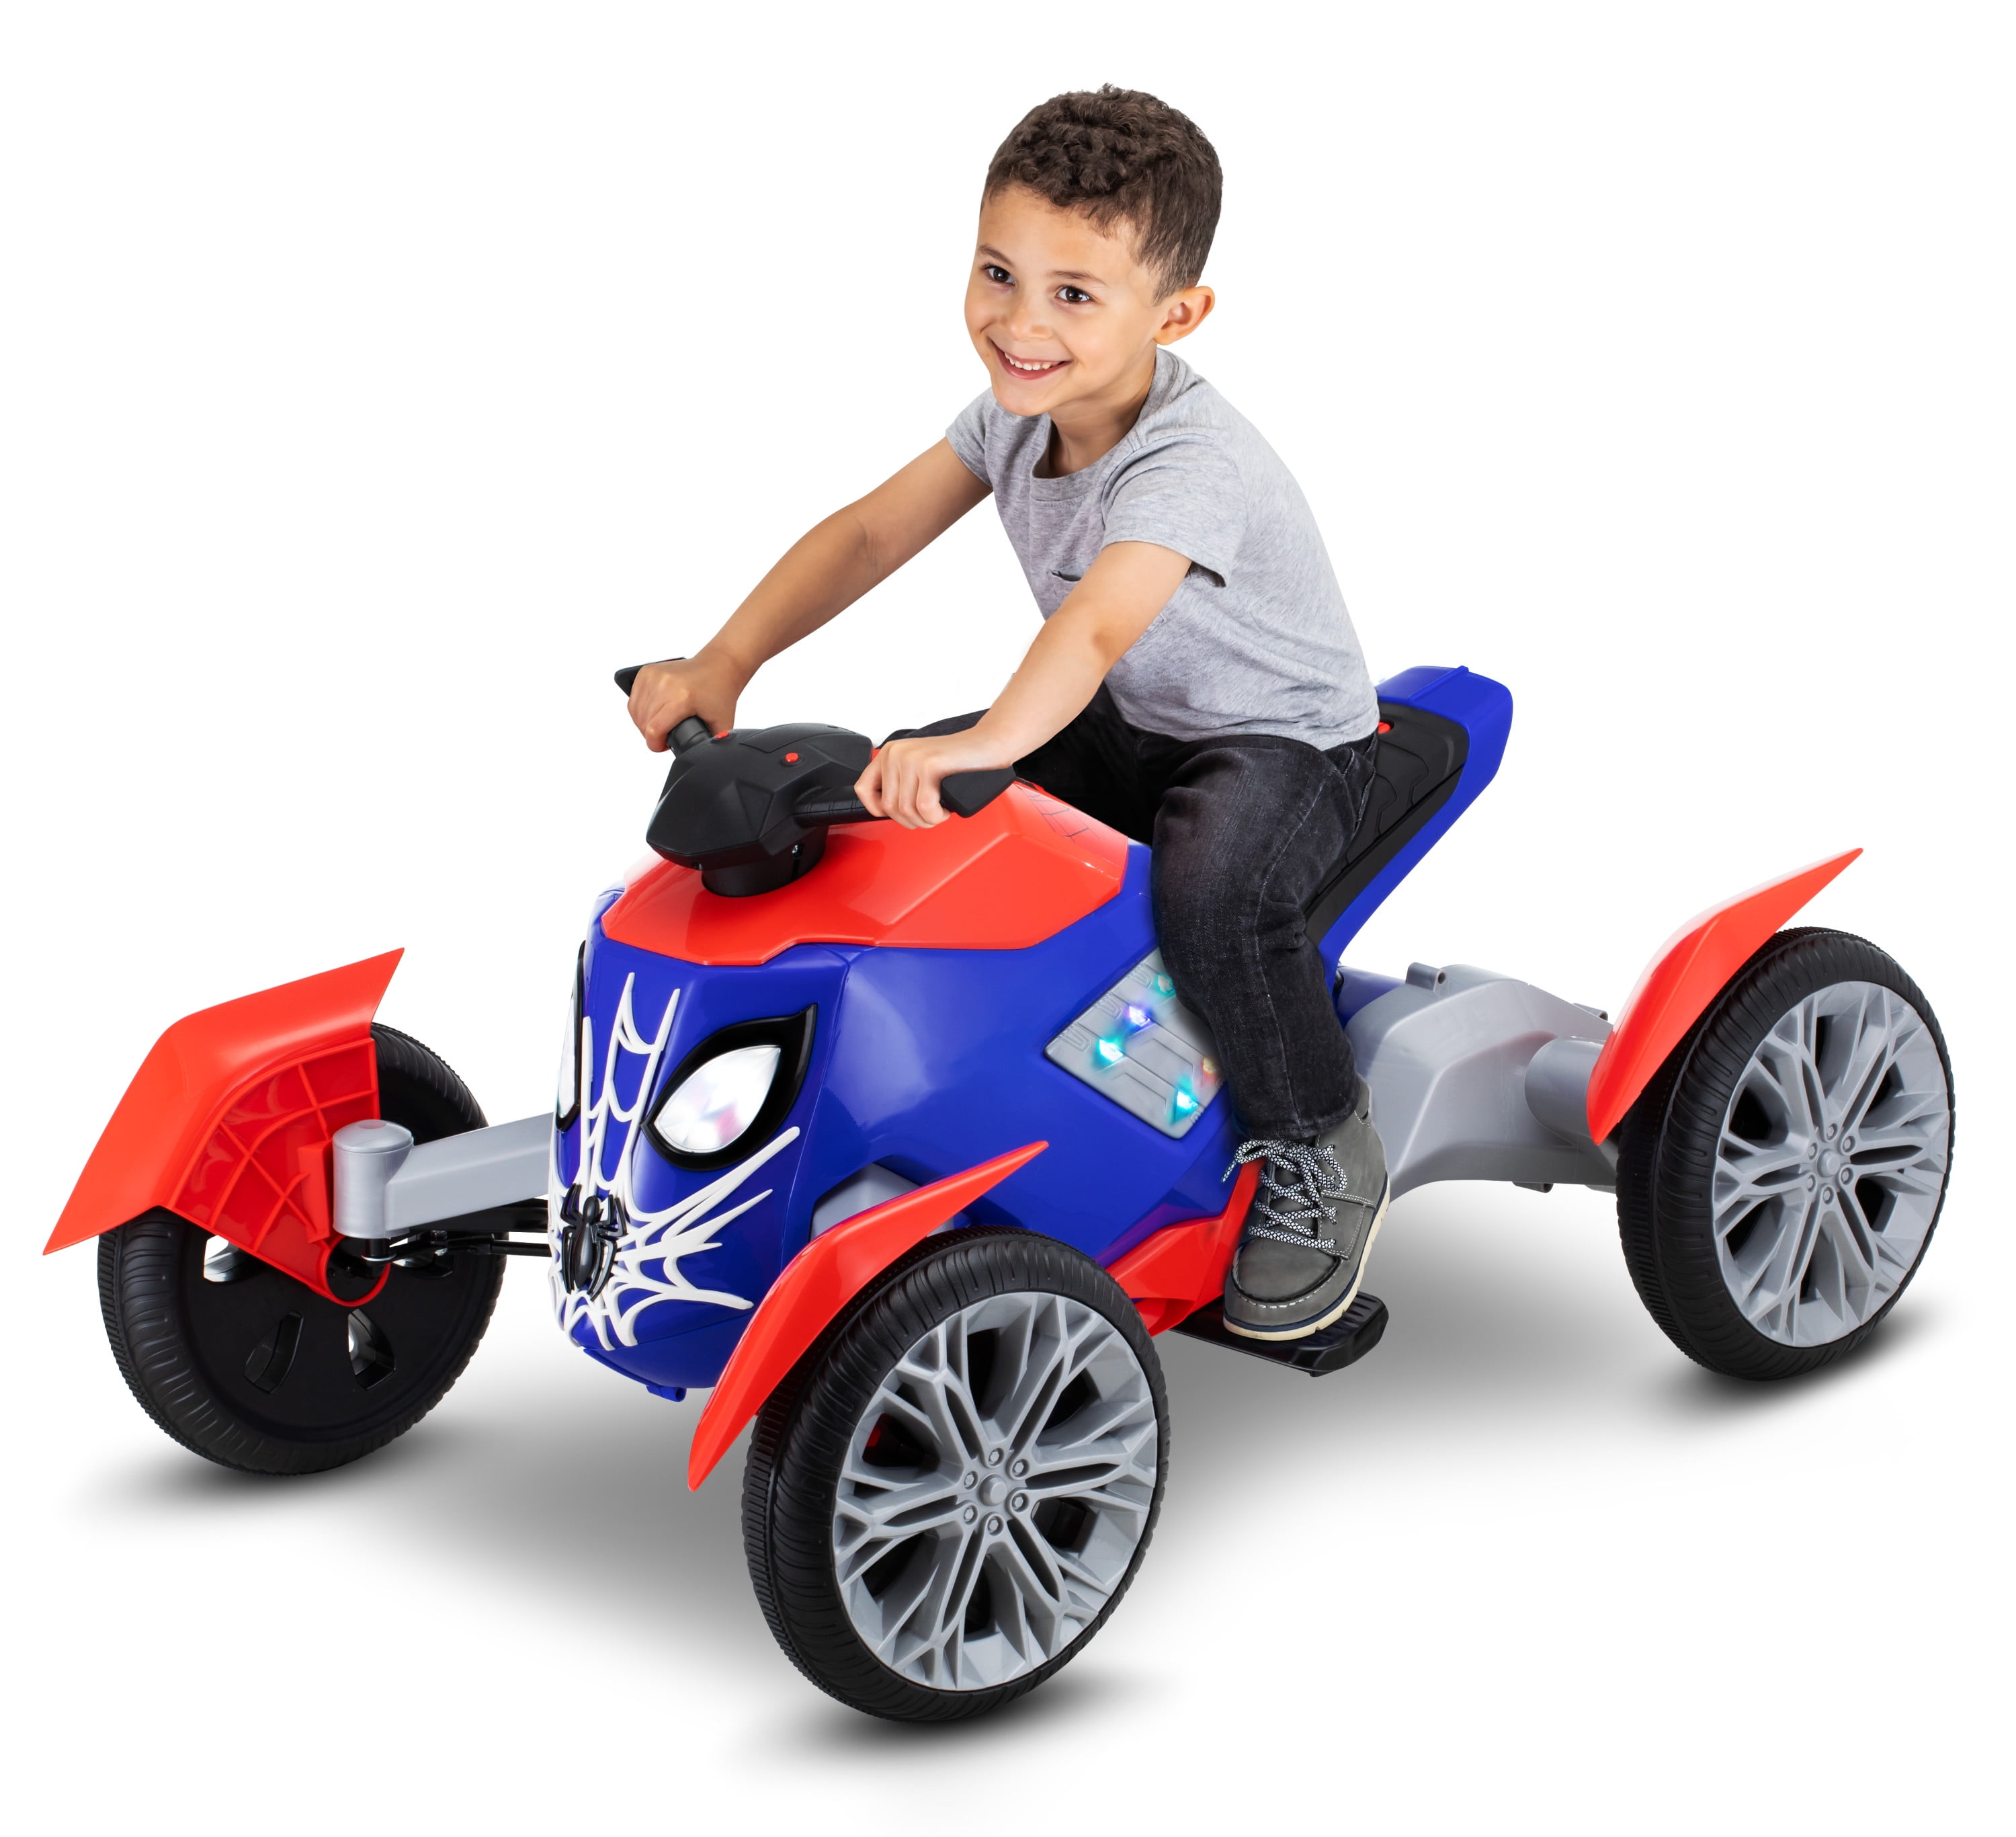 Kids Ride On Motorcycle Electric Toy Spiderman Car 6V Boys Gift Outdoors Marvel 